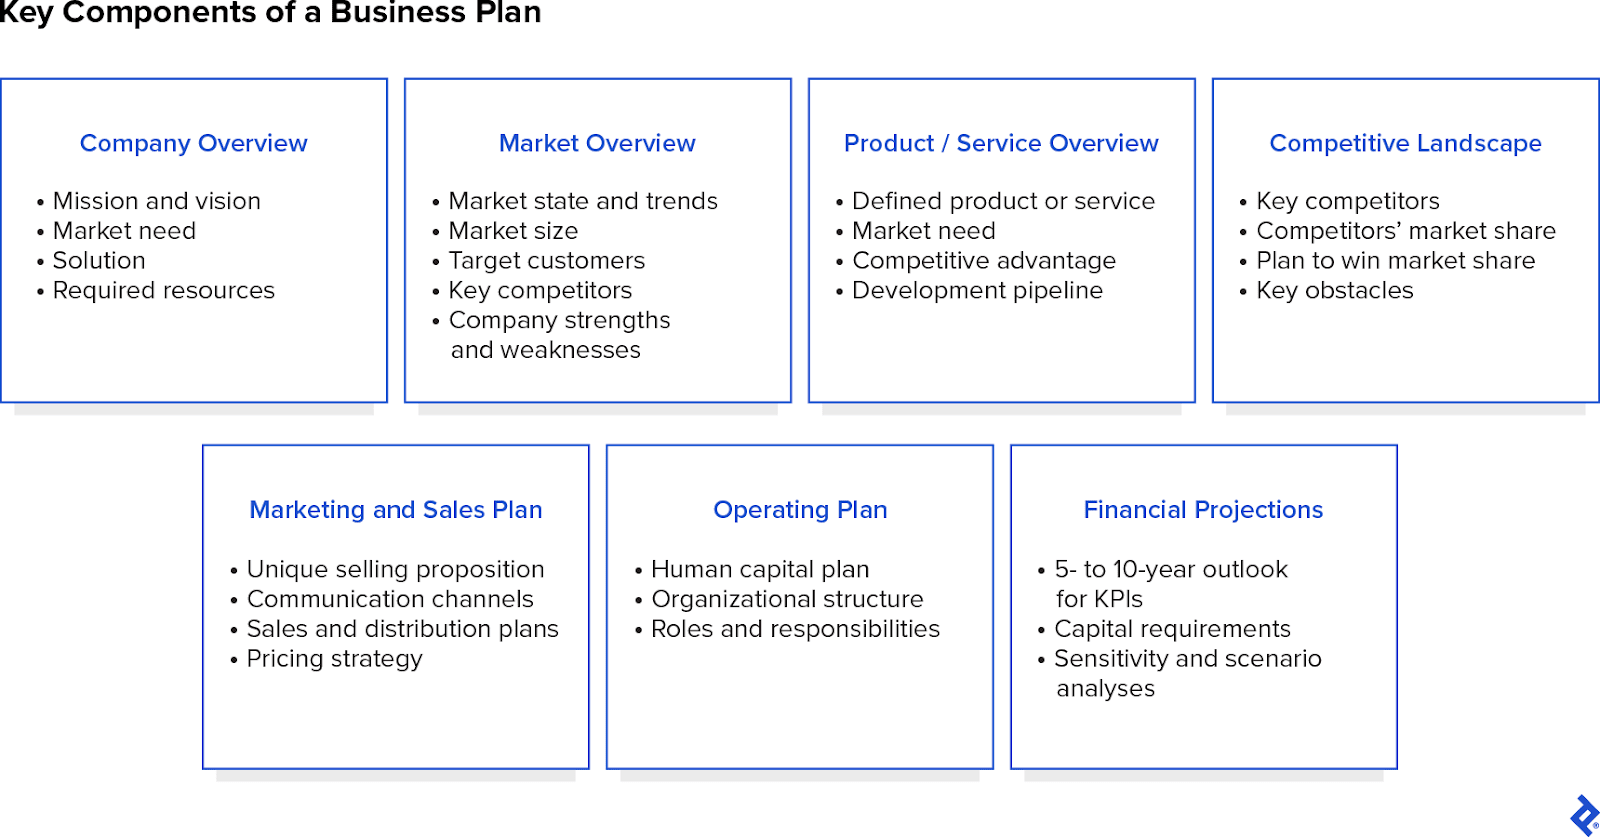 Seven text boxes that outline the key components of a business plan: Company Overview, Market Overview, Product/Service Overview, Competitive Landscape, Marketing and Sales Plan, Operating Plan, and Financial Projections.